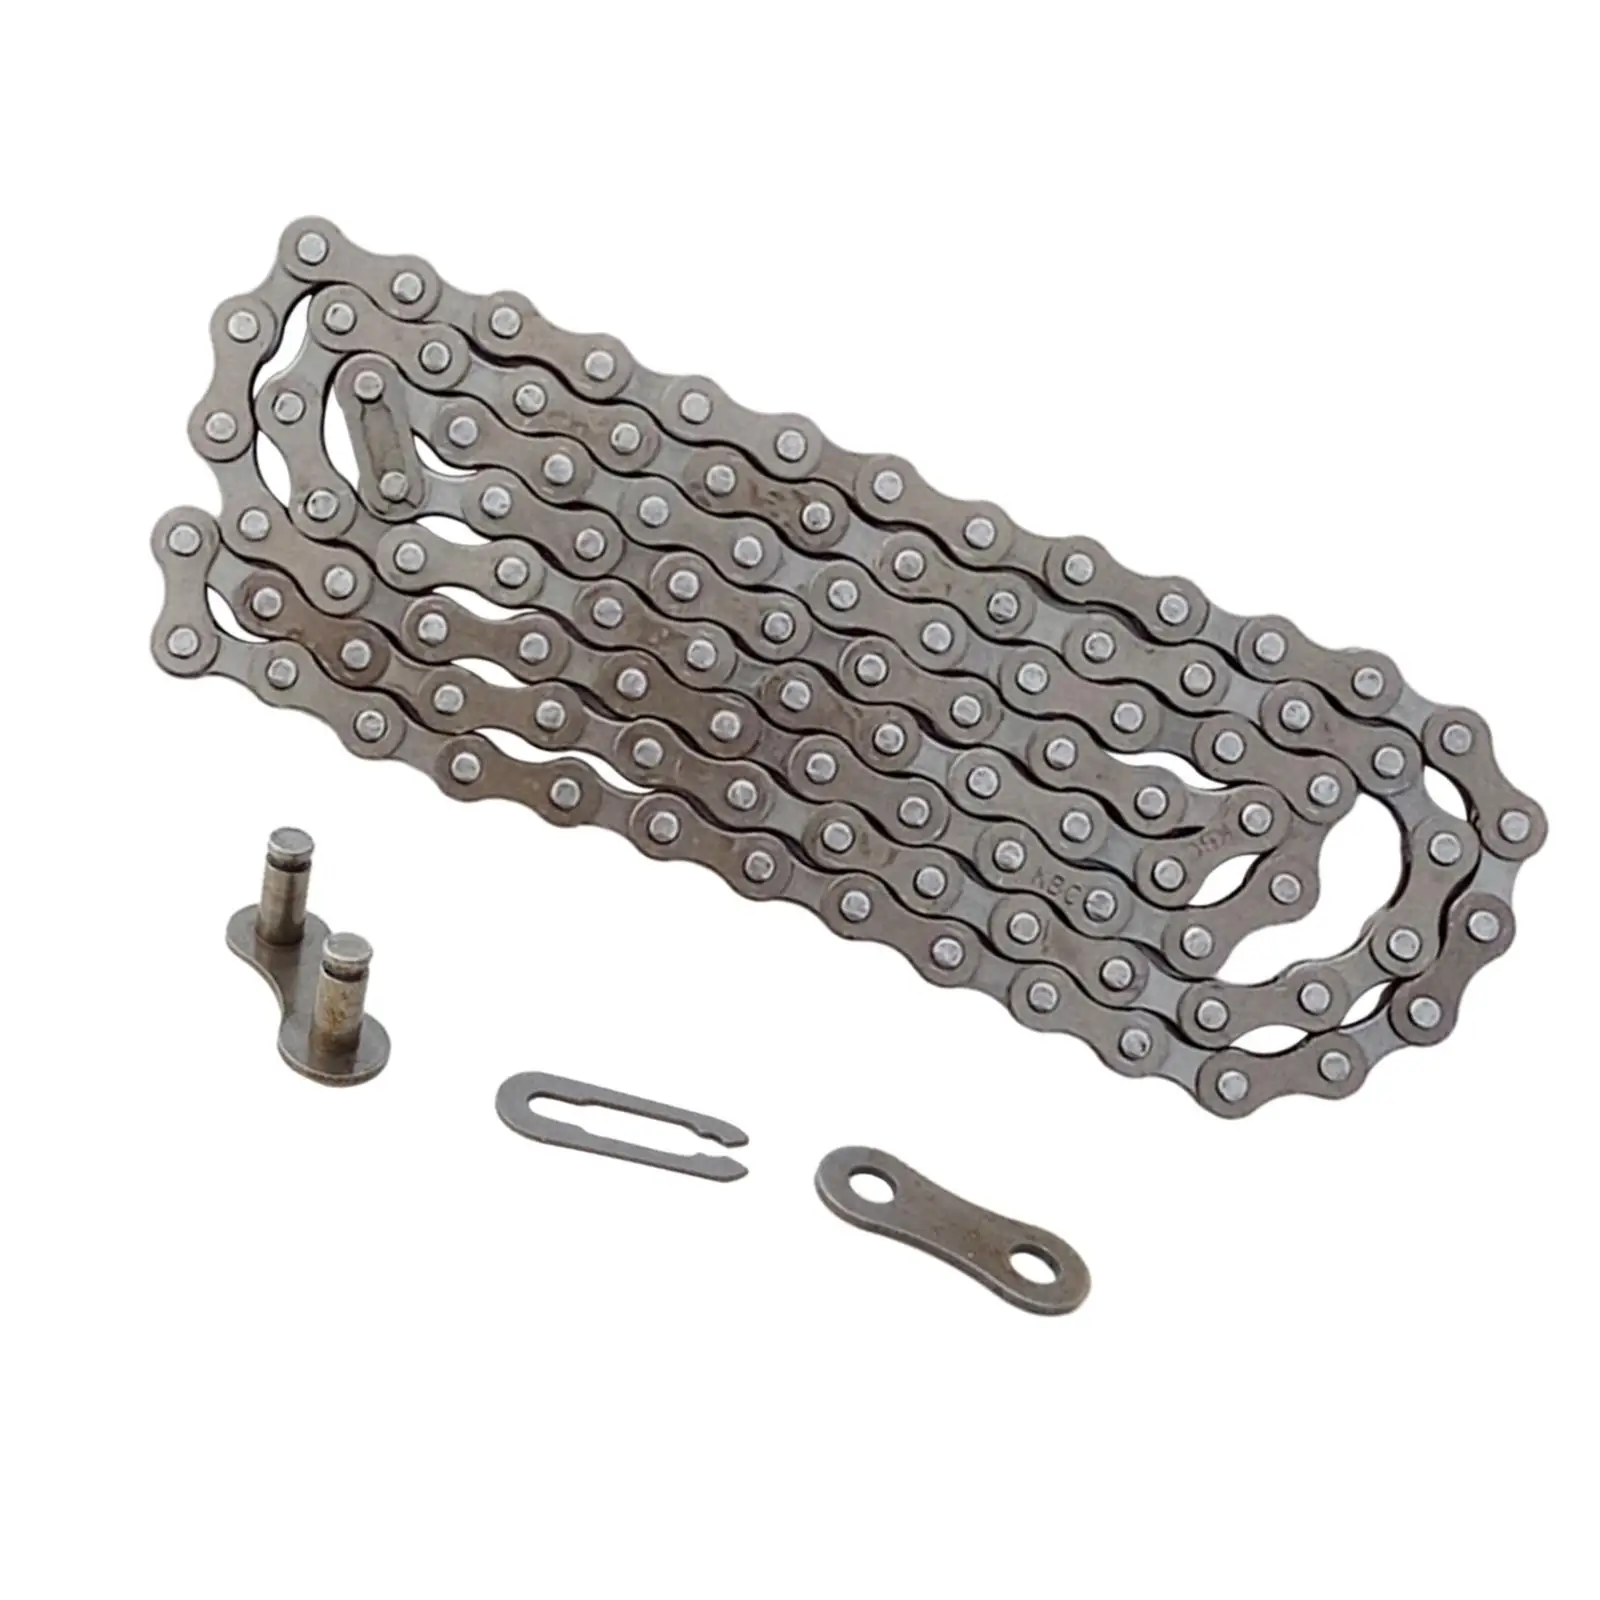 114x Bicycle Links Chain Connector Bike Chain Master Links for 6 7 8/9/10/Speeds Road Mountain Bike Cycling Repair Spare Part